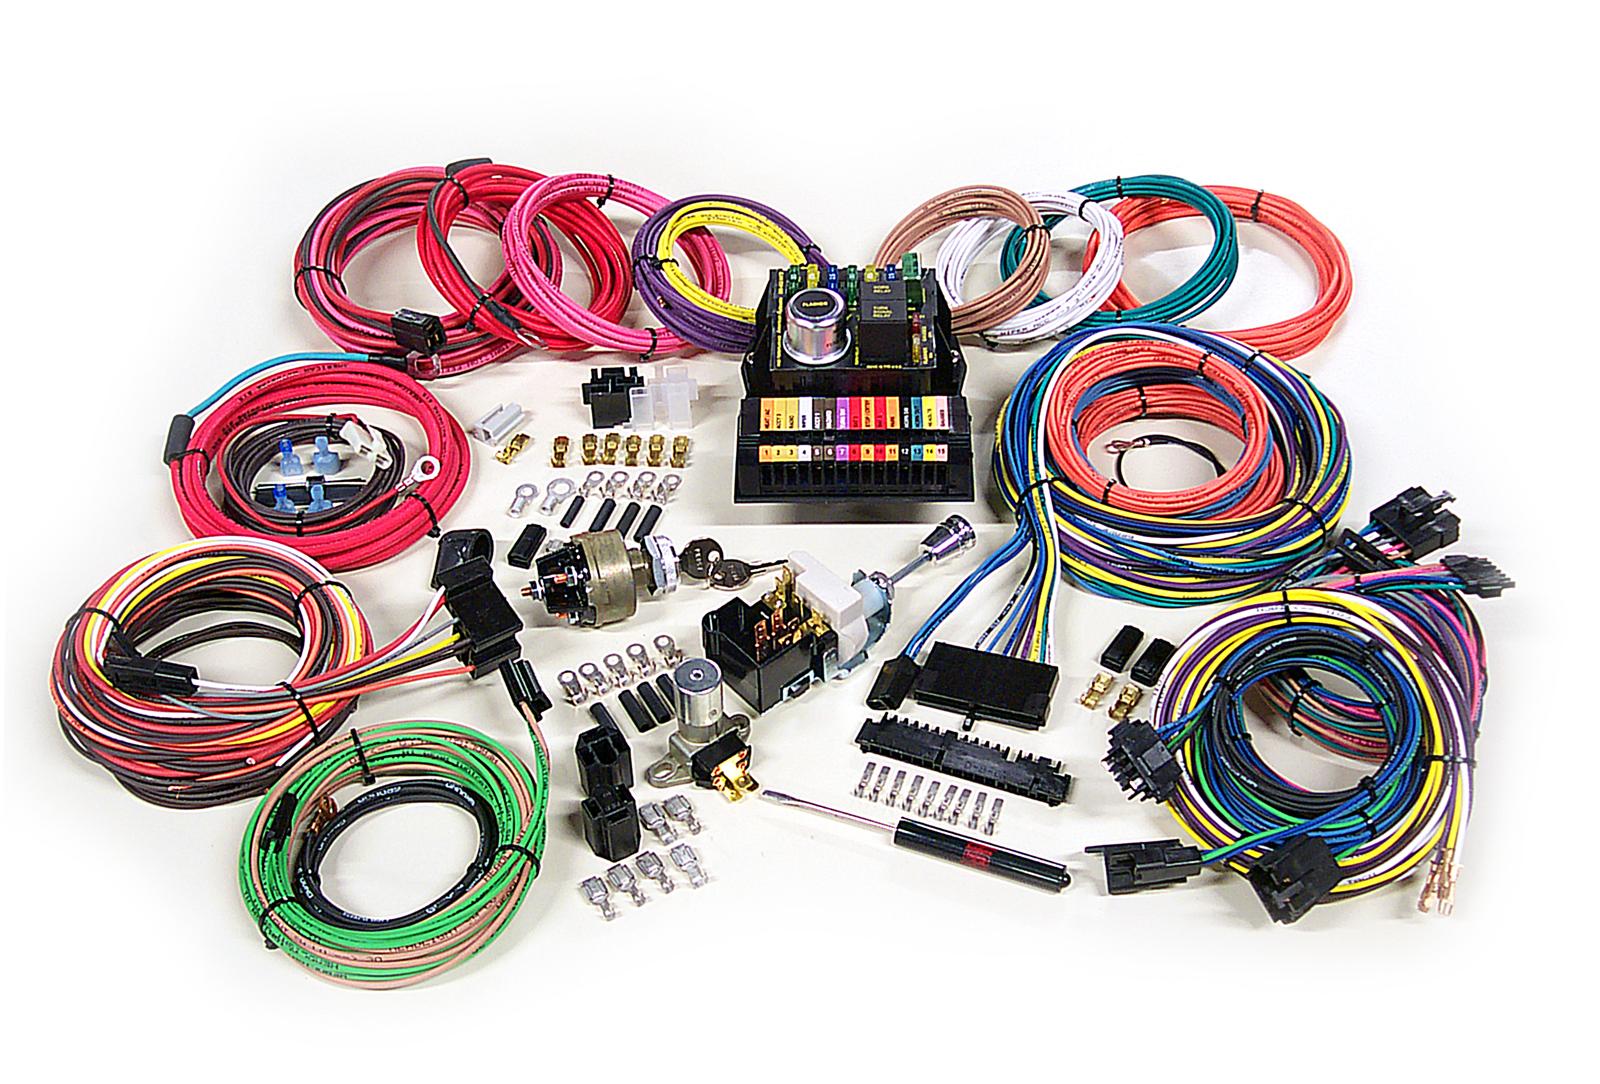 American Autowire Highway 15 Wiring Harness Kits 500703 ... automotive wiring harness materials 